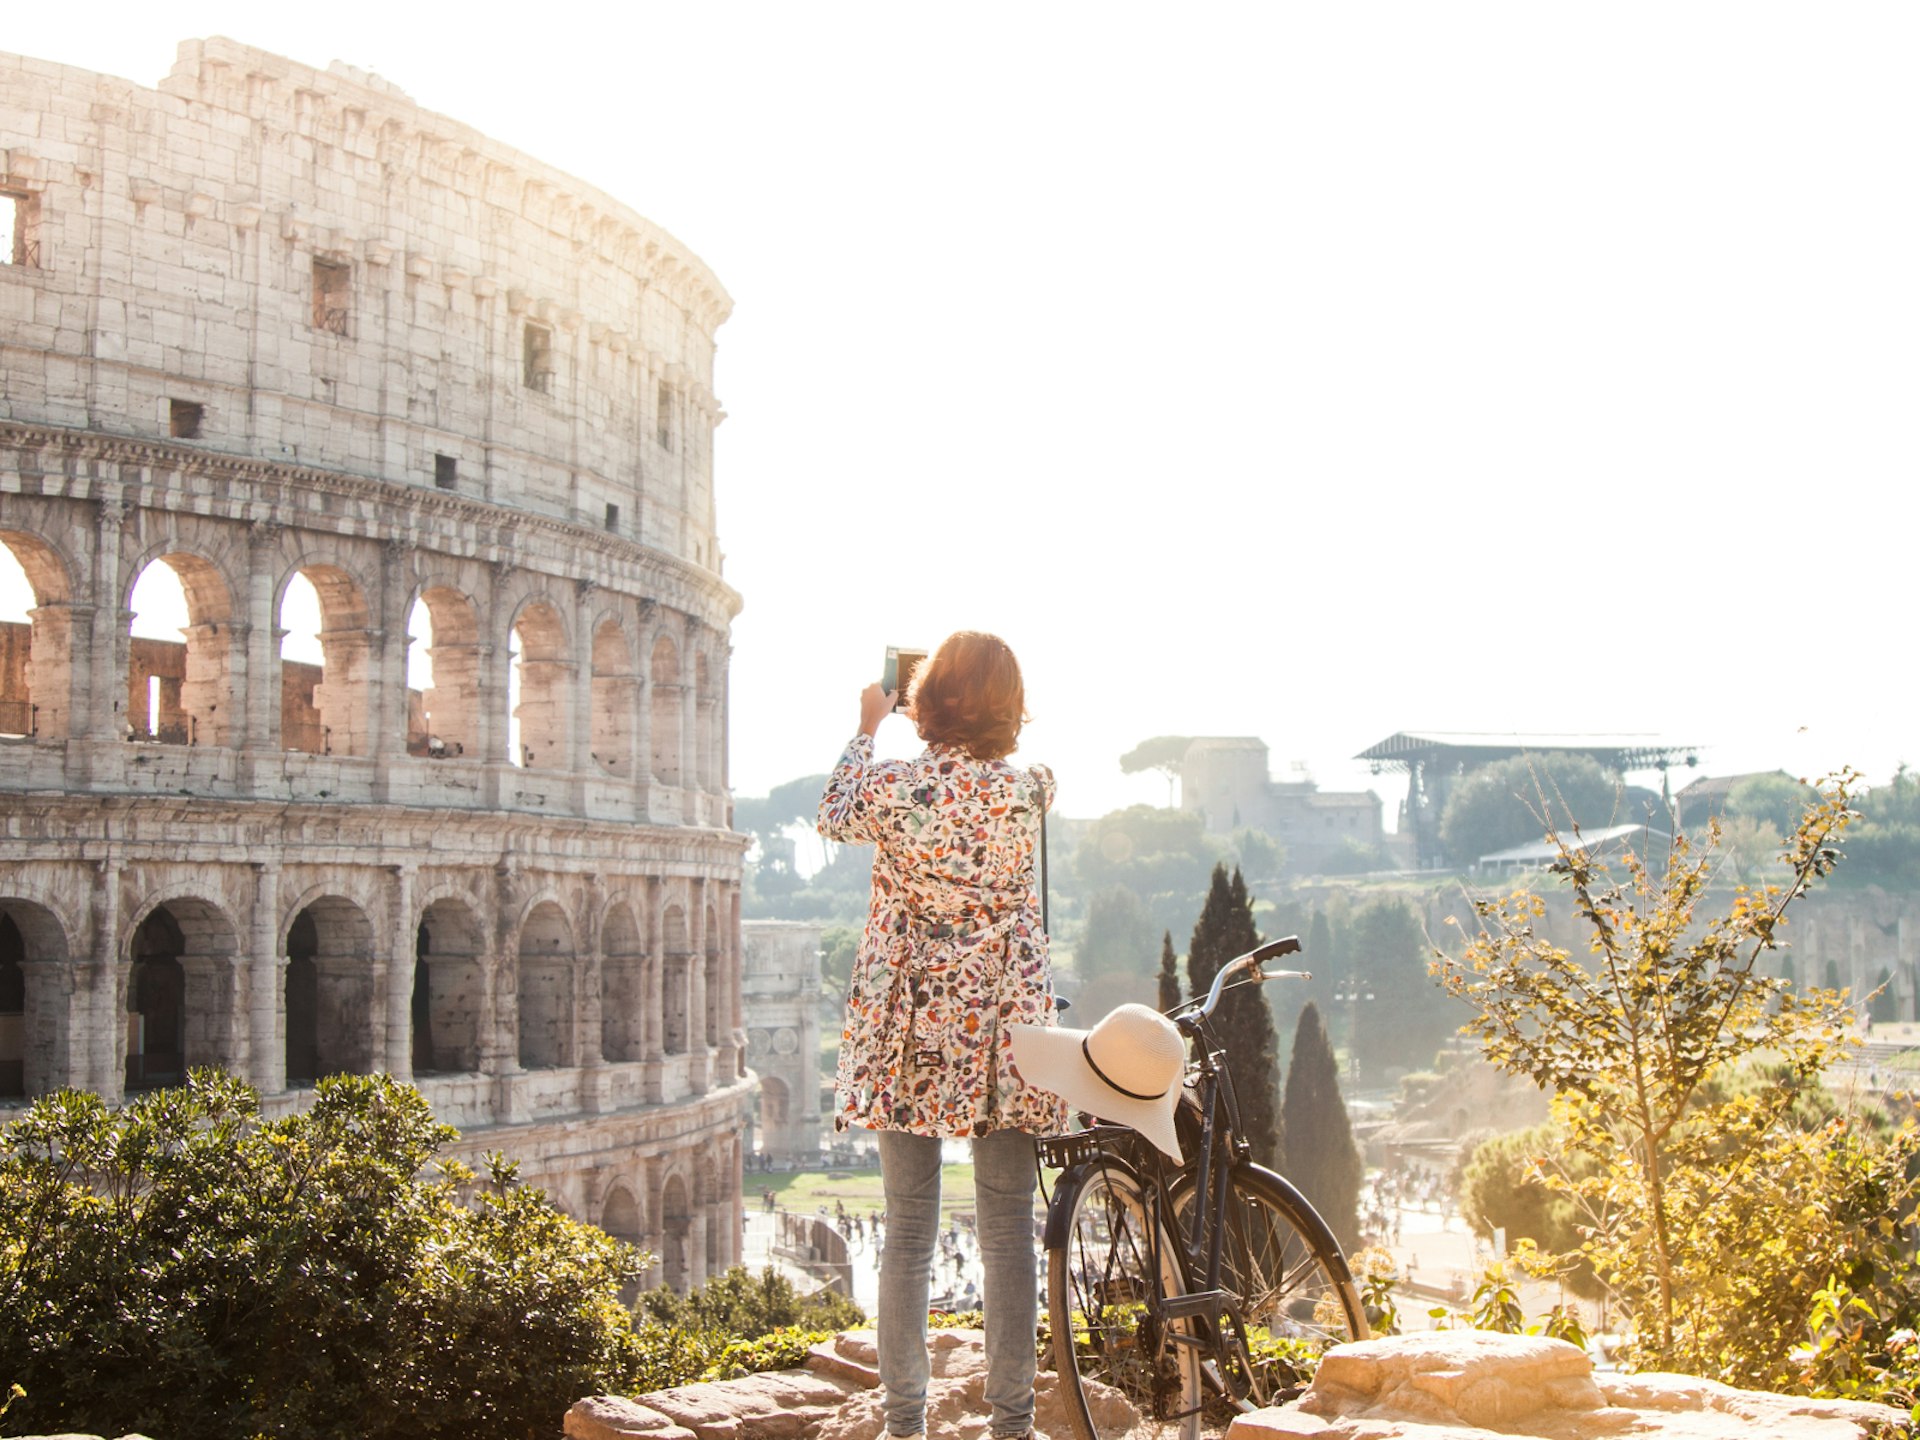 A woman takes a photo of the Colosseum in Rome 